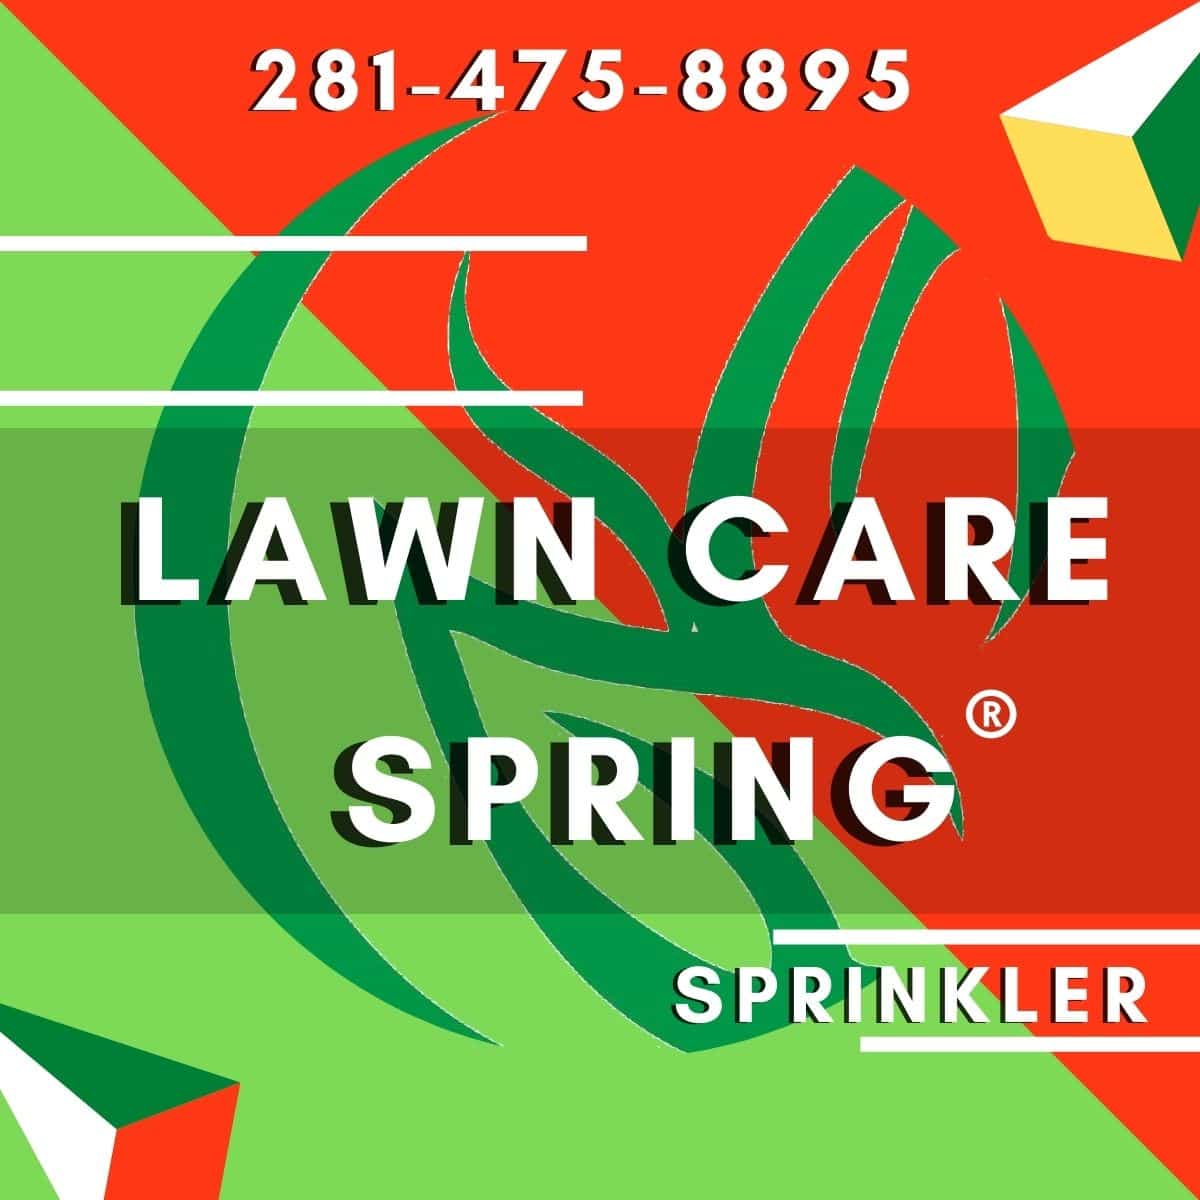 The Woodlands Lawn Care Services